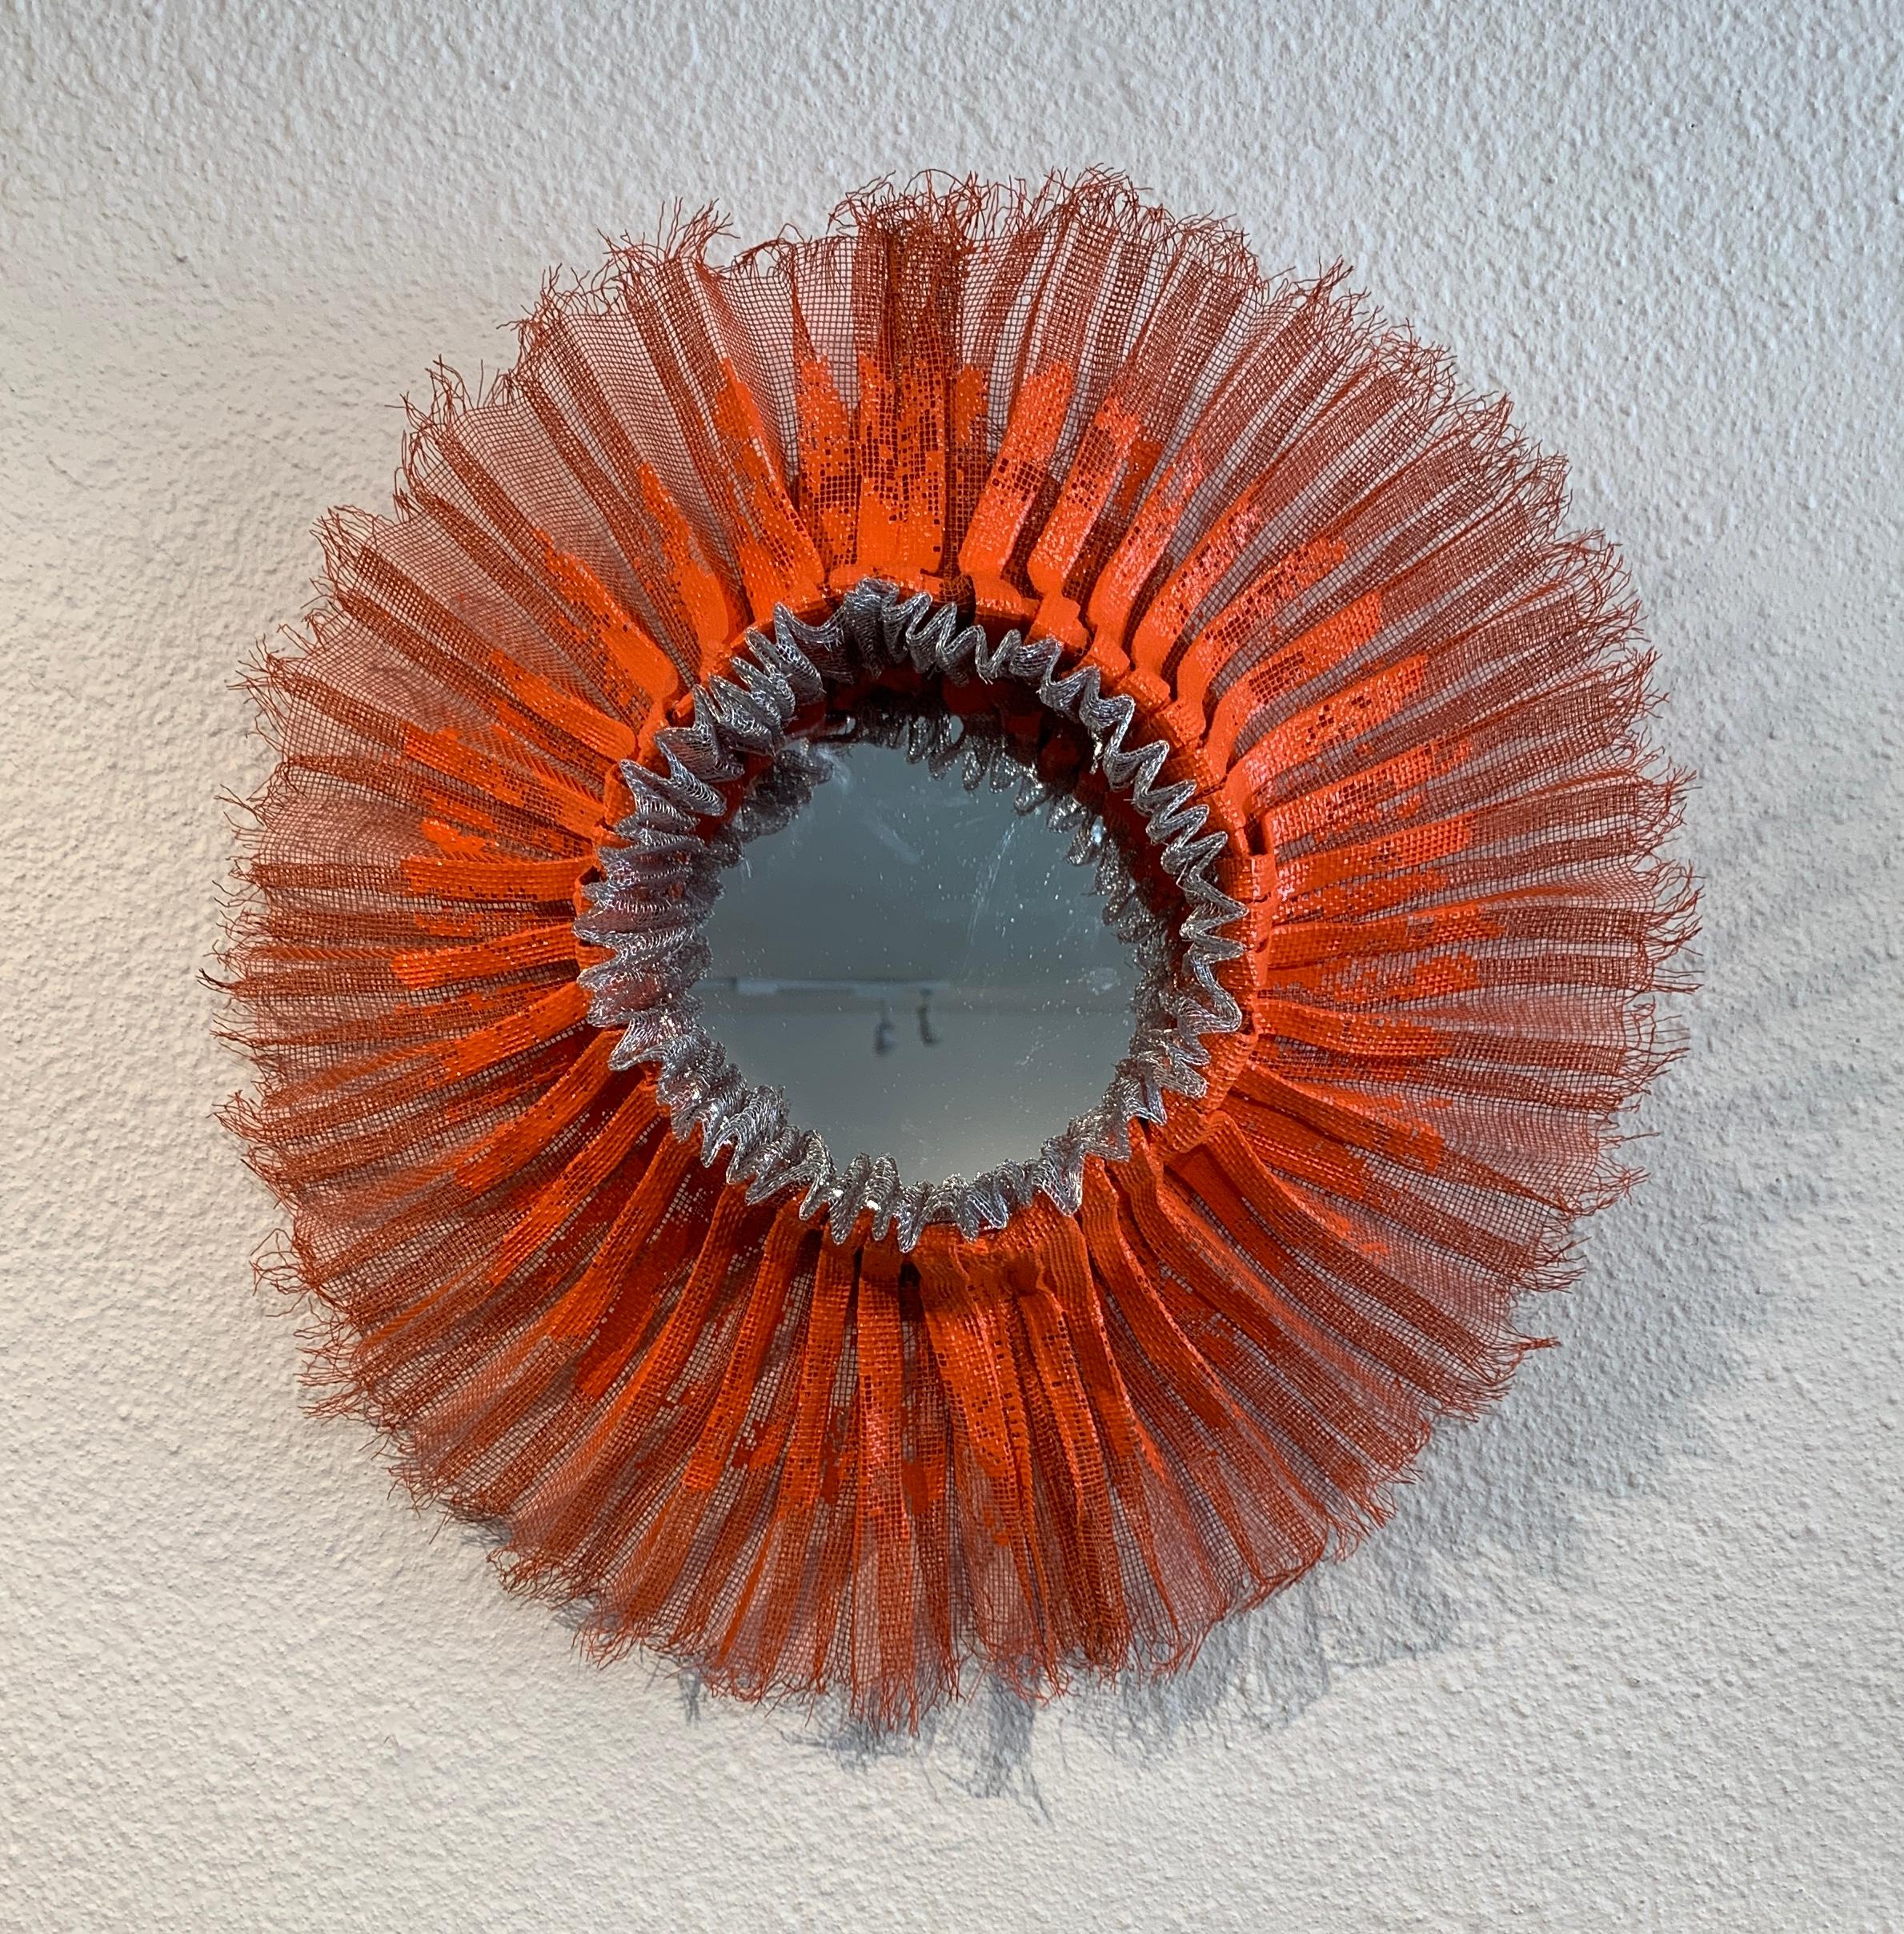 Flora Narcissus - Orange Silver Ruff, Atticus Adams Mesh & Mirror Wall Sculpture

Metal fiber sculpture that incorporates a mirror, fascinating light and shadow into its form.

NOTE:  This piece can be combined with the OTHER Flora Narcissus pieces